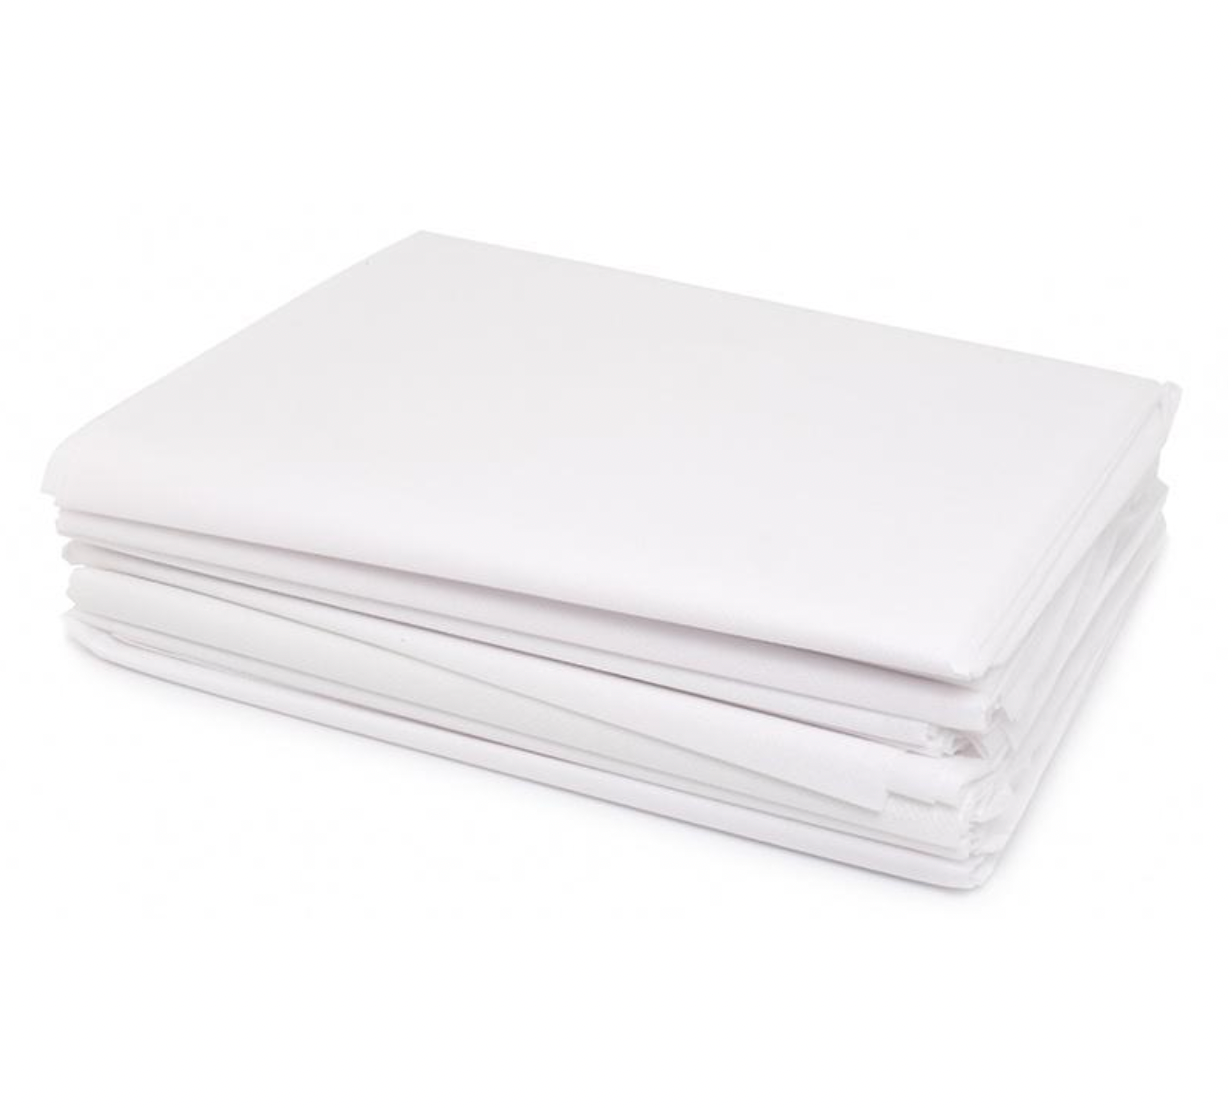 10 x Disposable Fitted Bed Sheets (pack of 10)